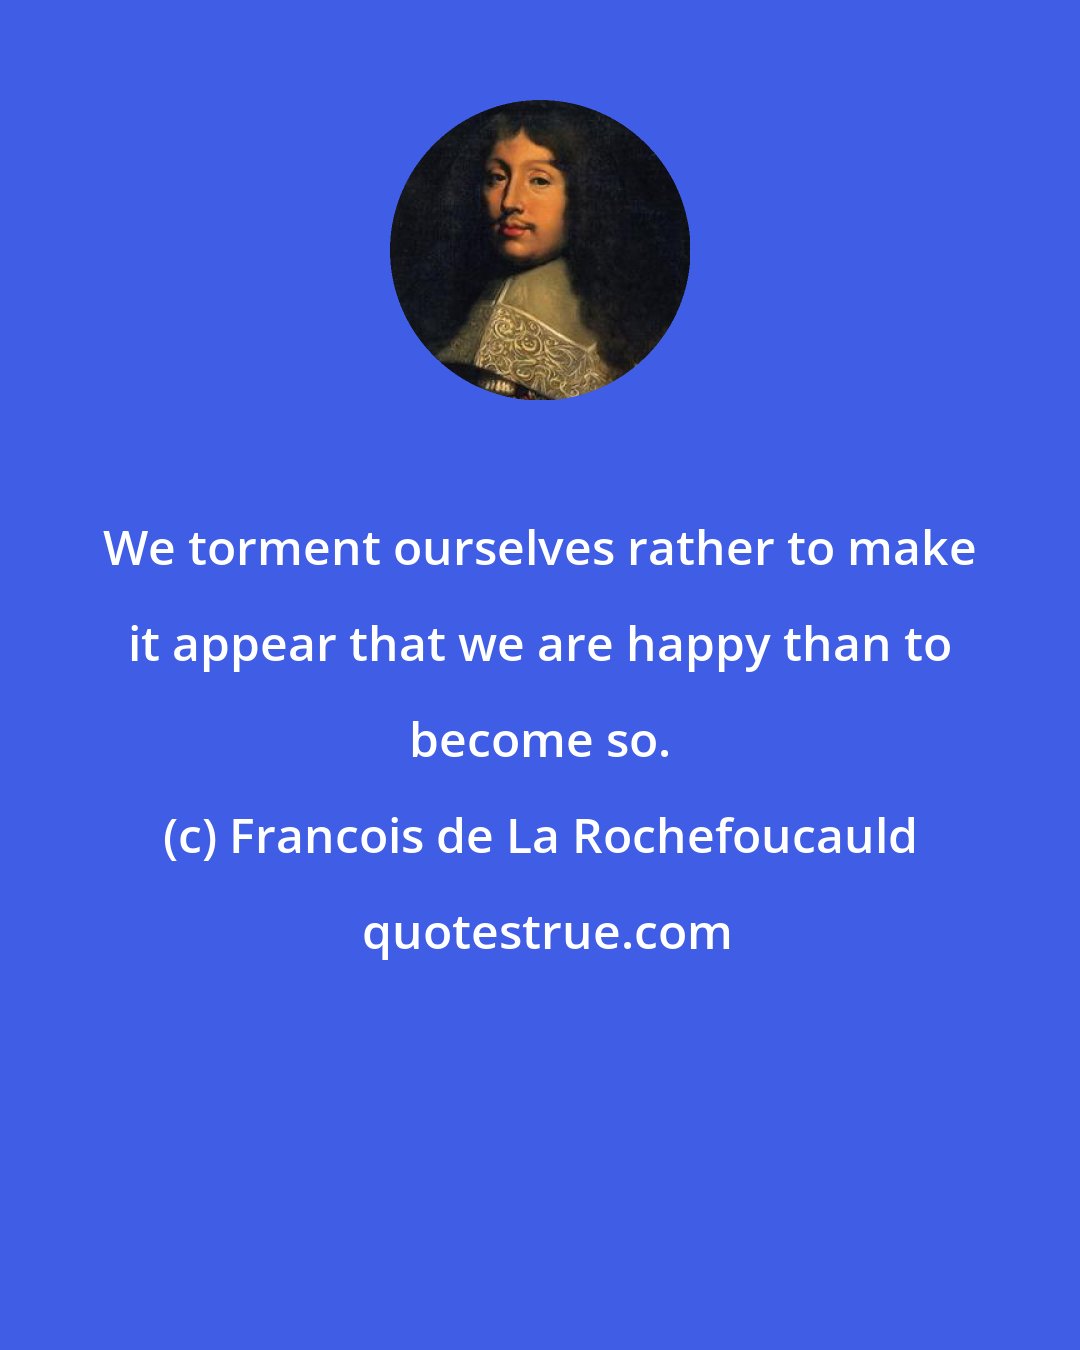 Francois de La Rochefoucauld: We torment ourselves rather to make it appear that we are happy than to become so.